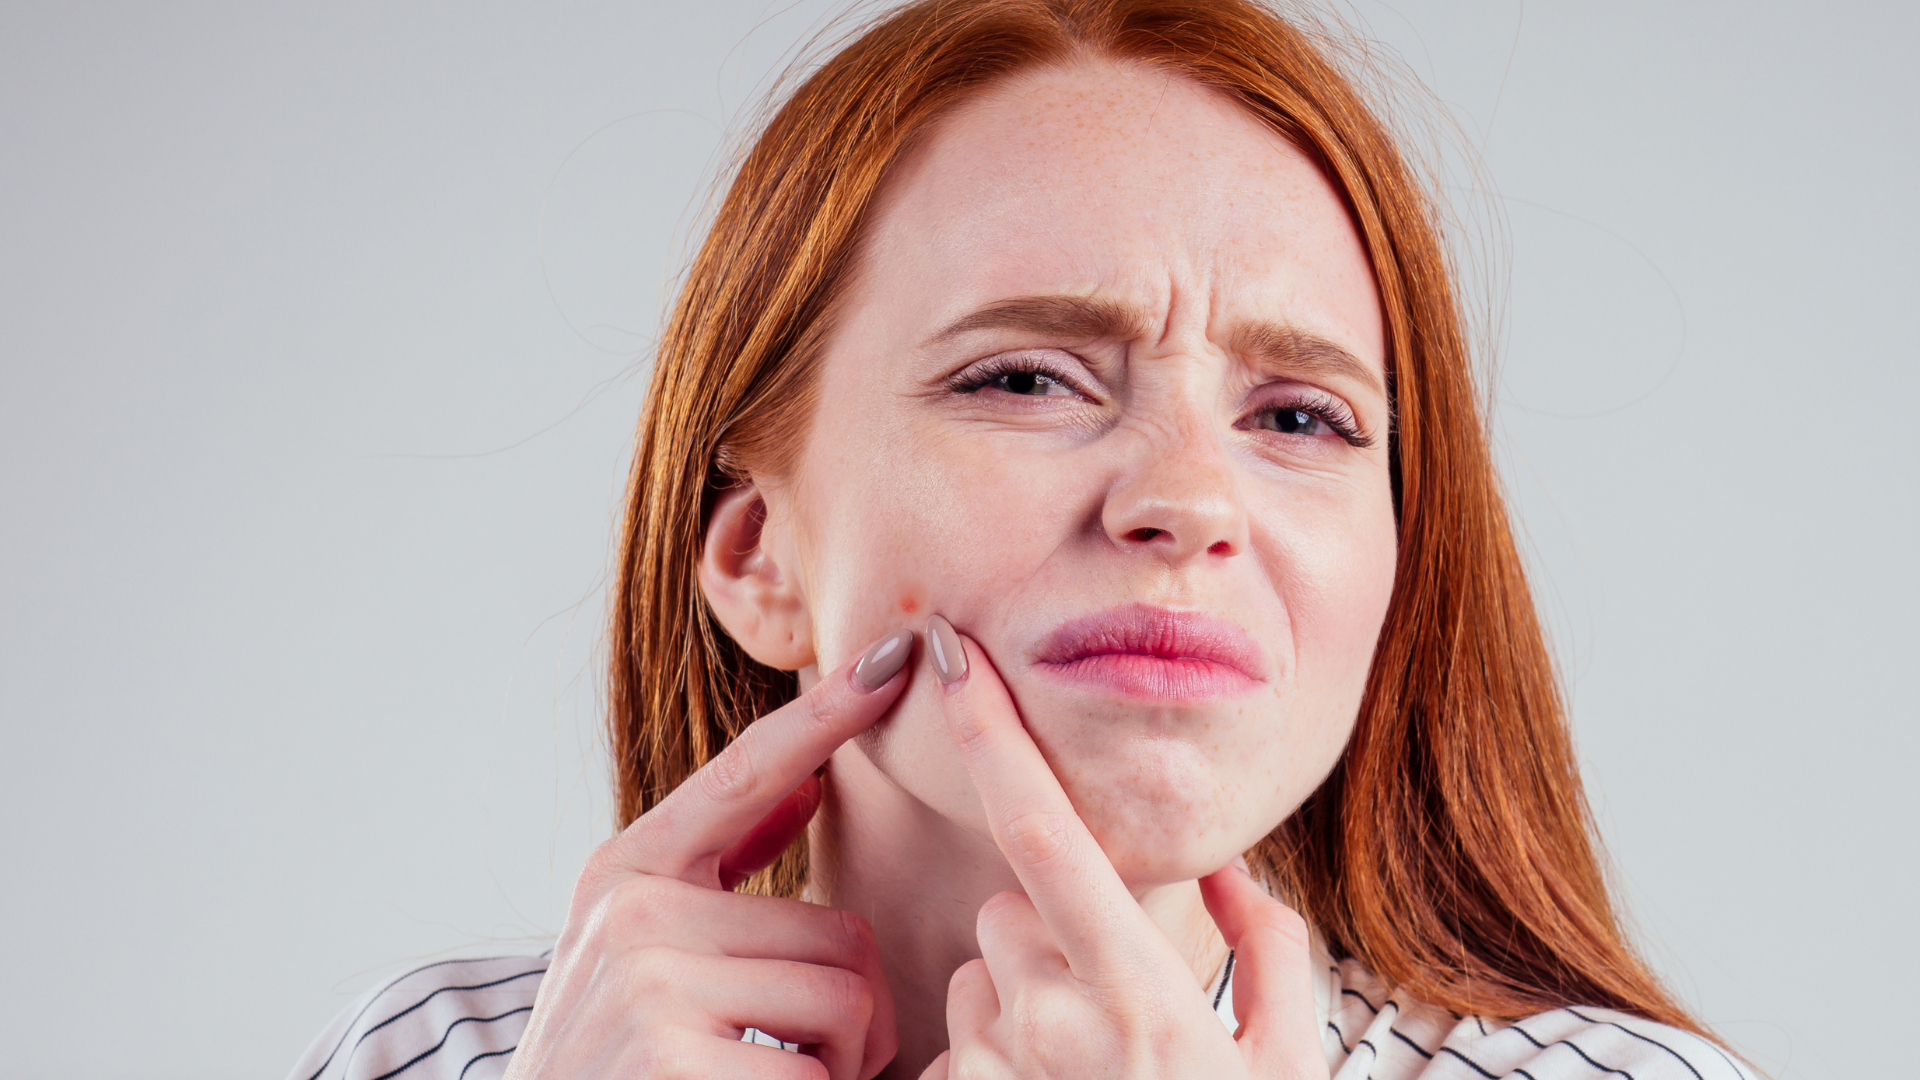 Redheads Can Get Rid Of Pesky Blackheads With These Expert Tips